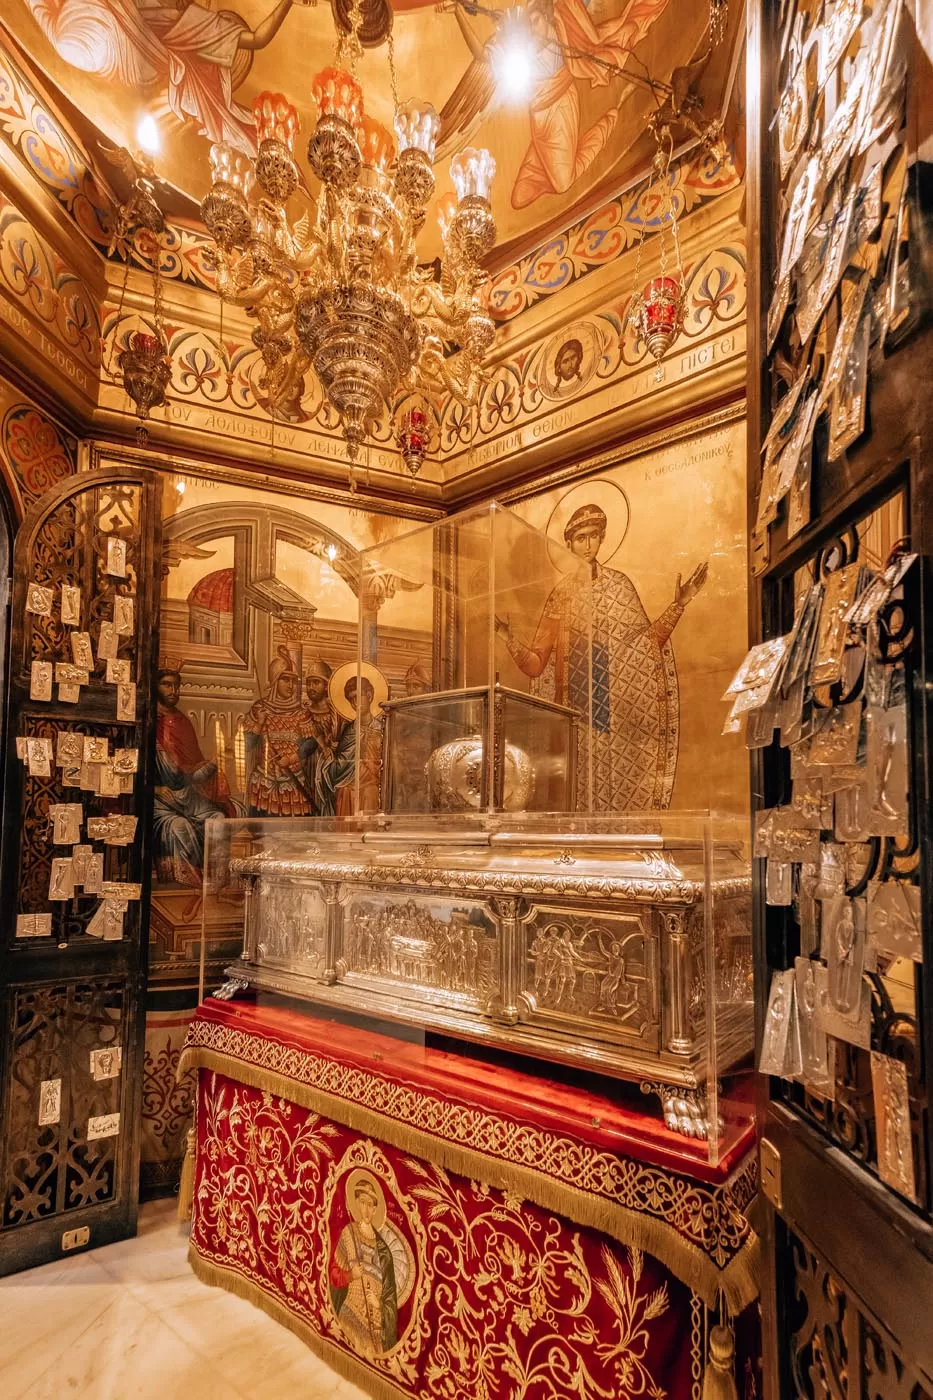 Things to do in Thessaloniki - St Demetrios relics